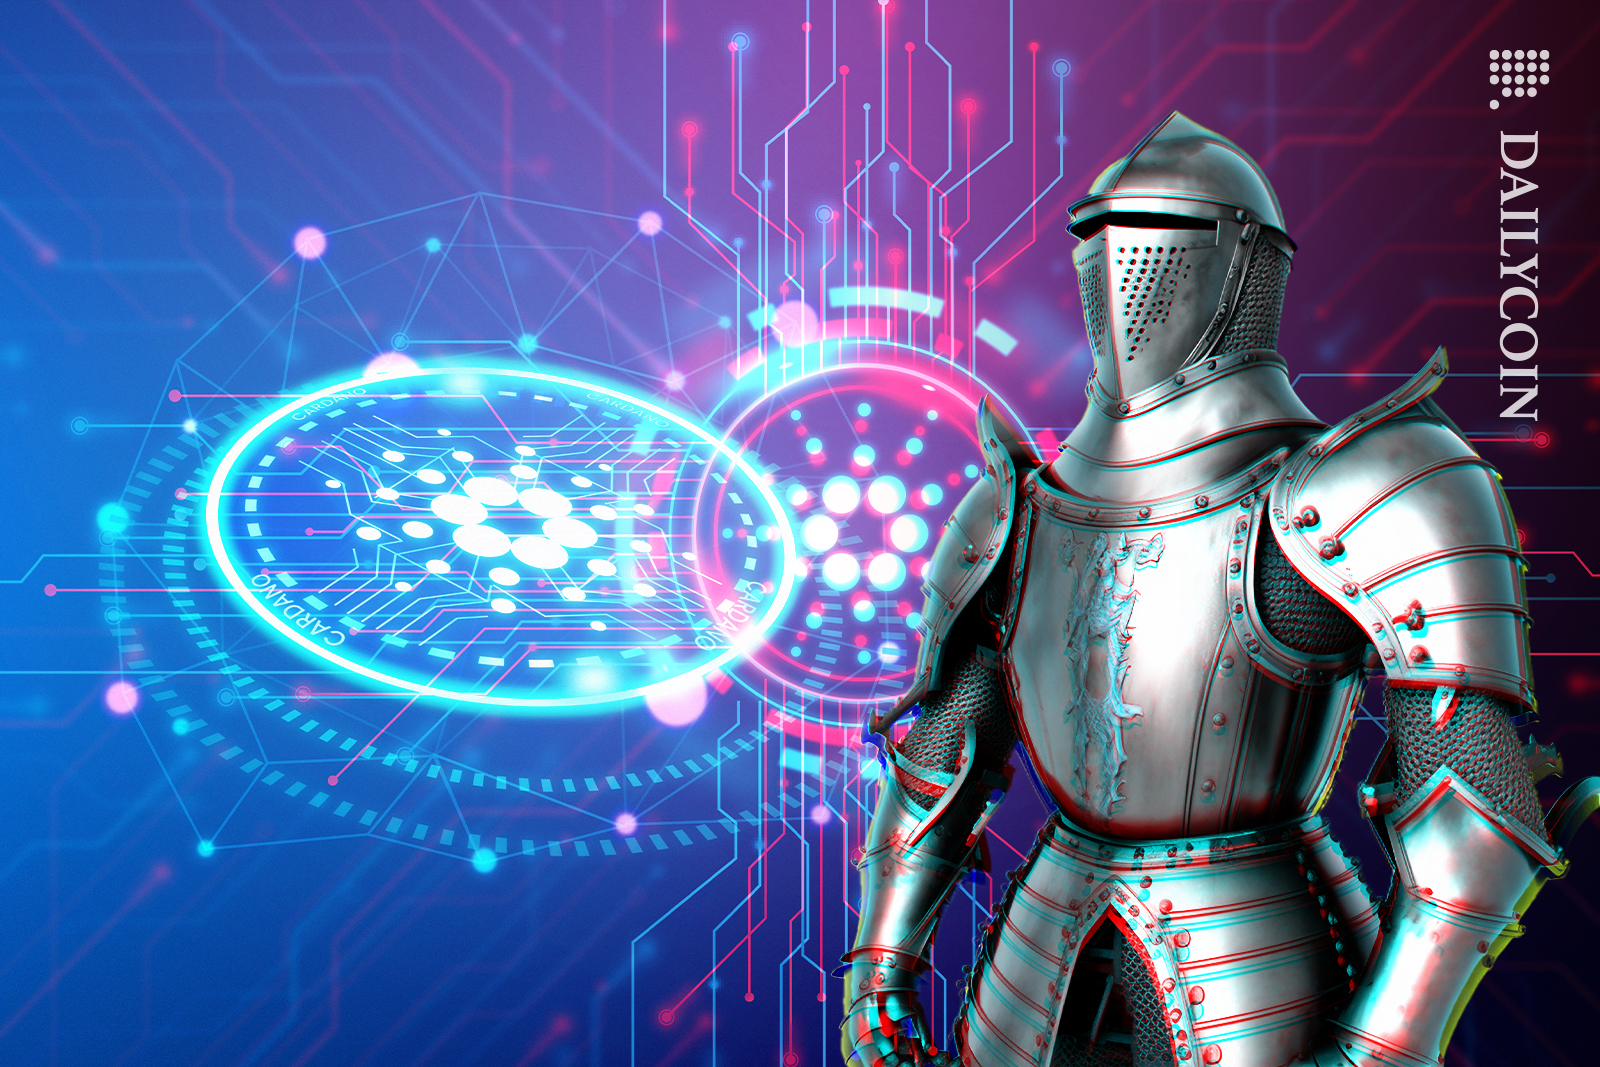 Mithril Cardano warrior looking after Cardano nodes.